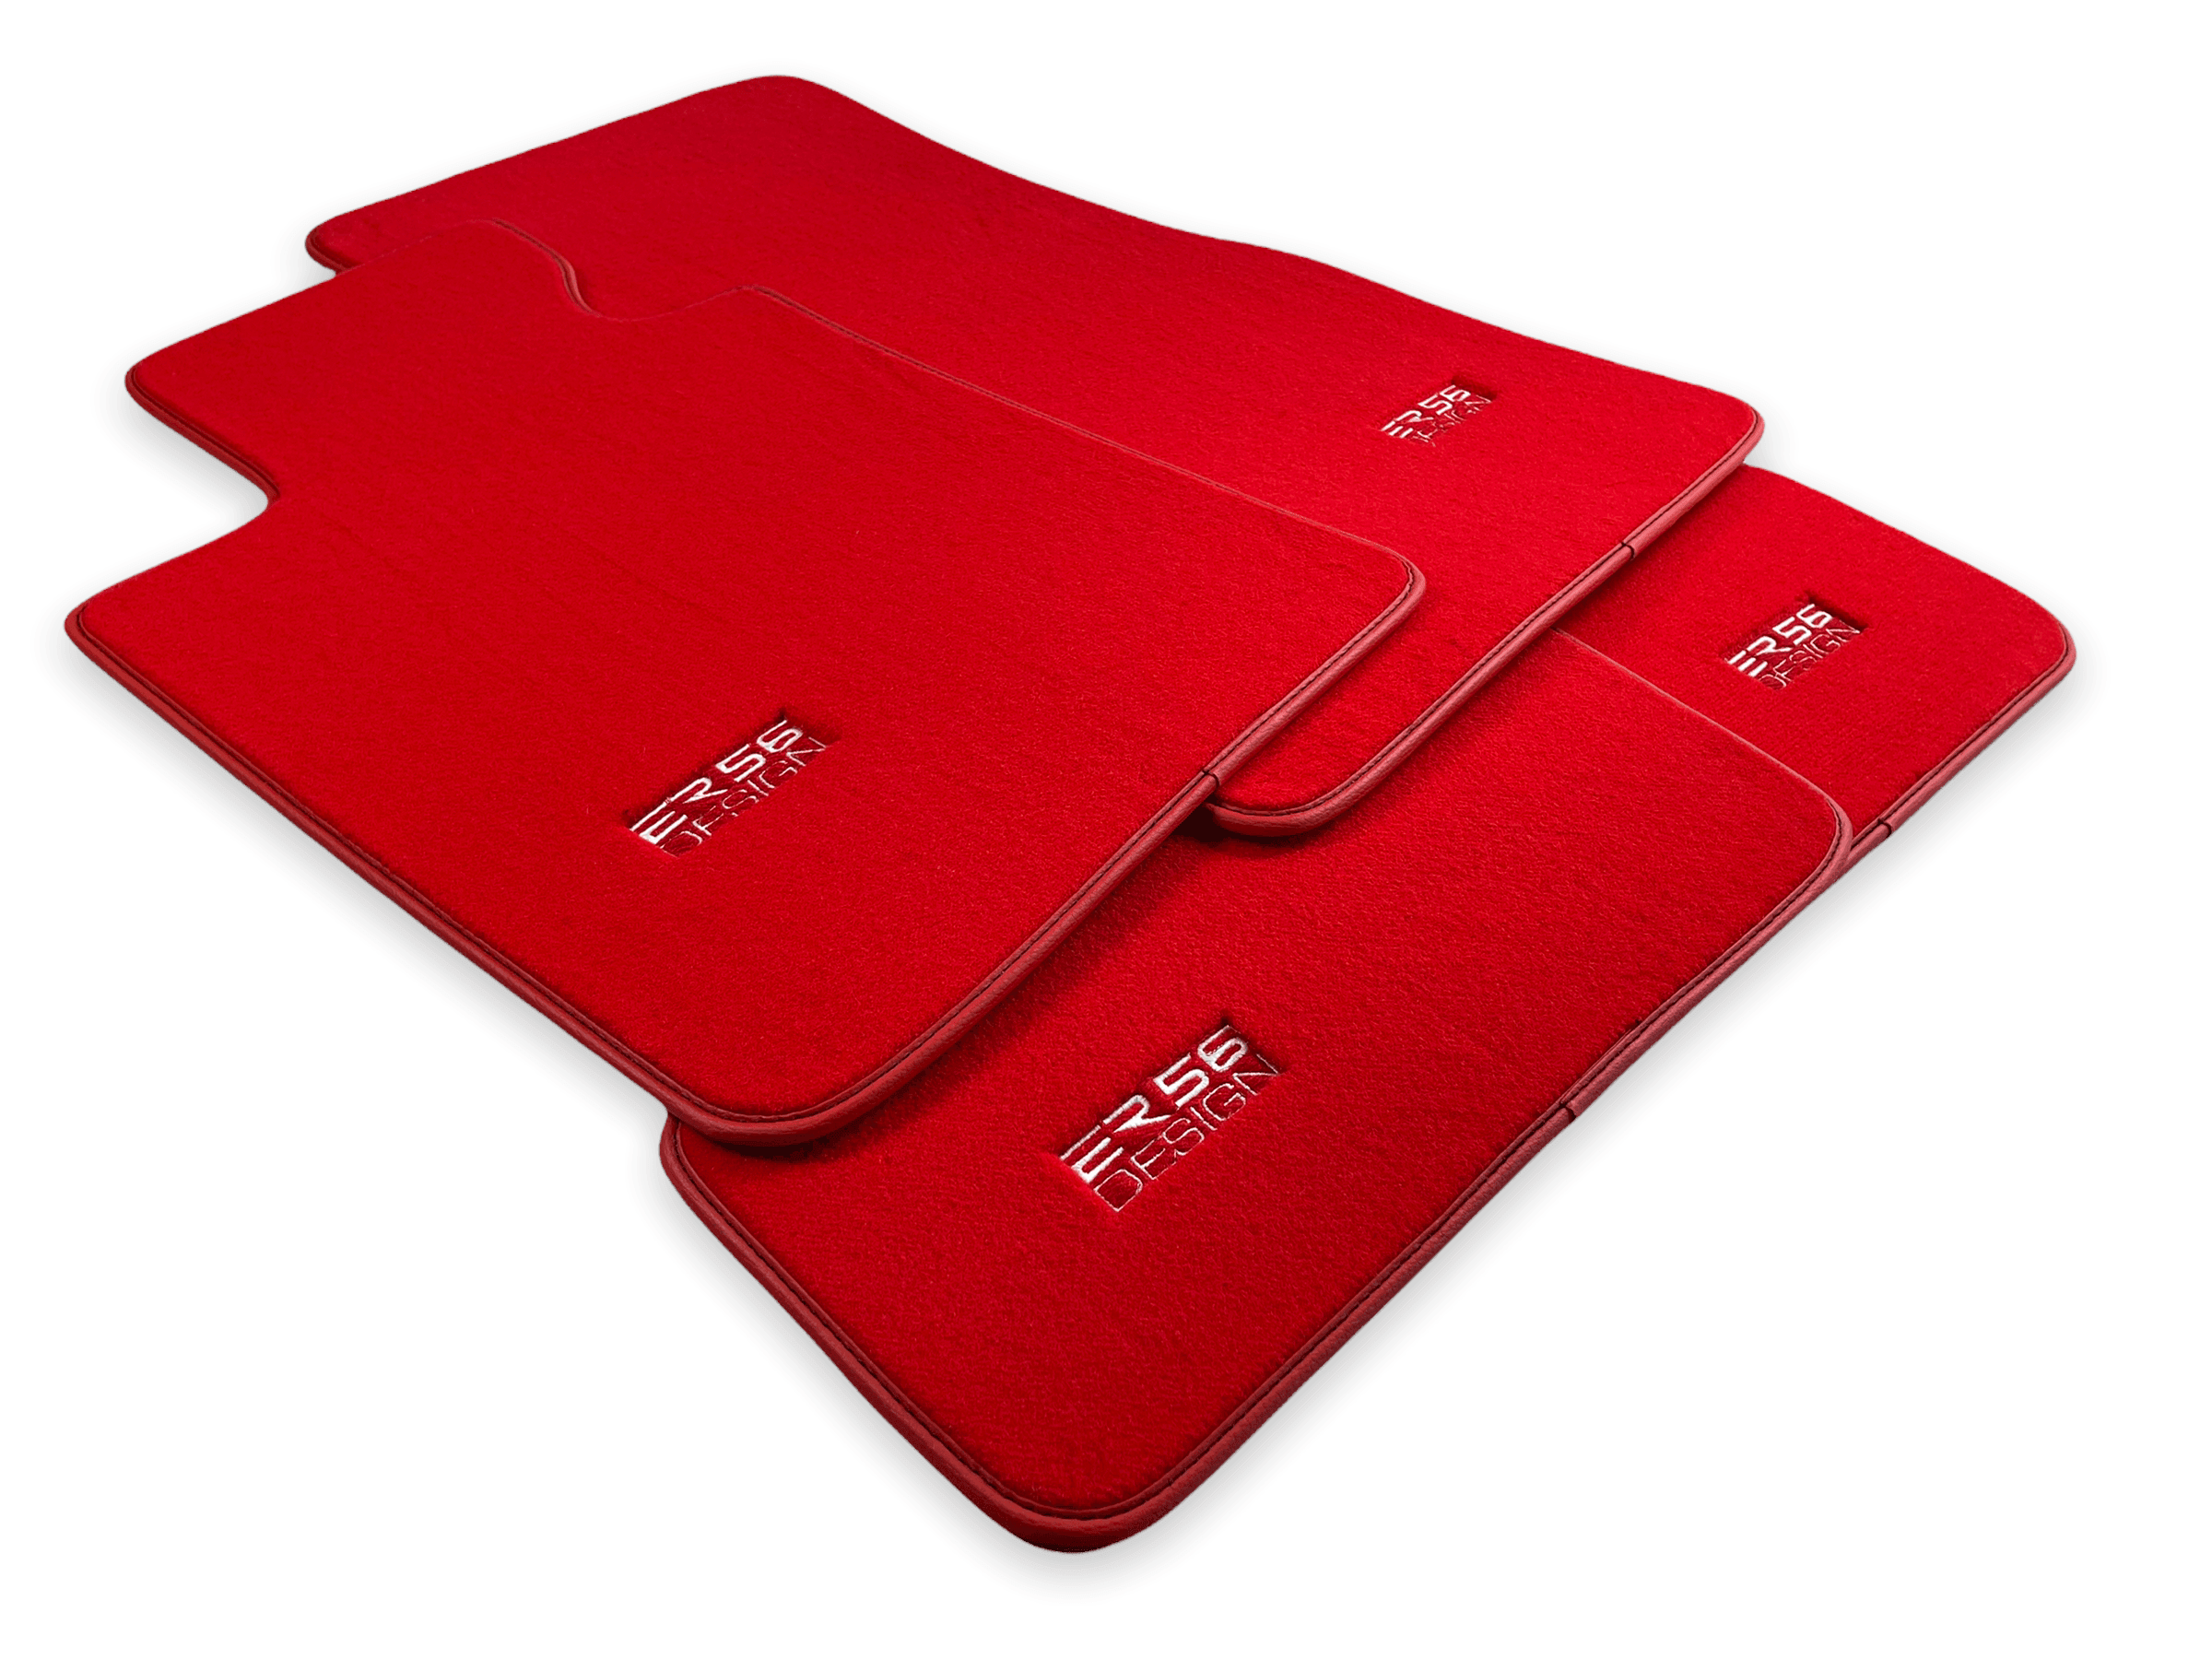 Red Mats For BMW 3 Series E36 2-door Coupe - ER56 Design Brand - AutoWin